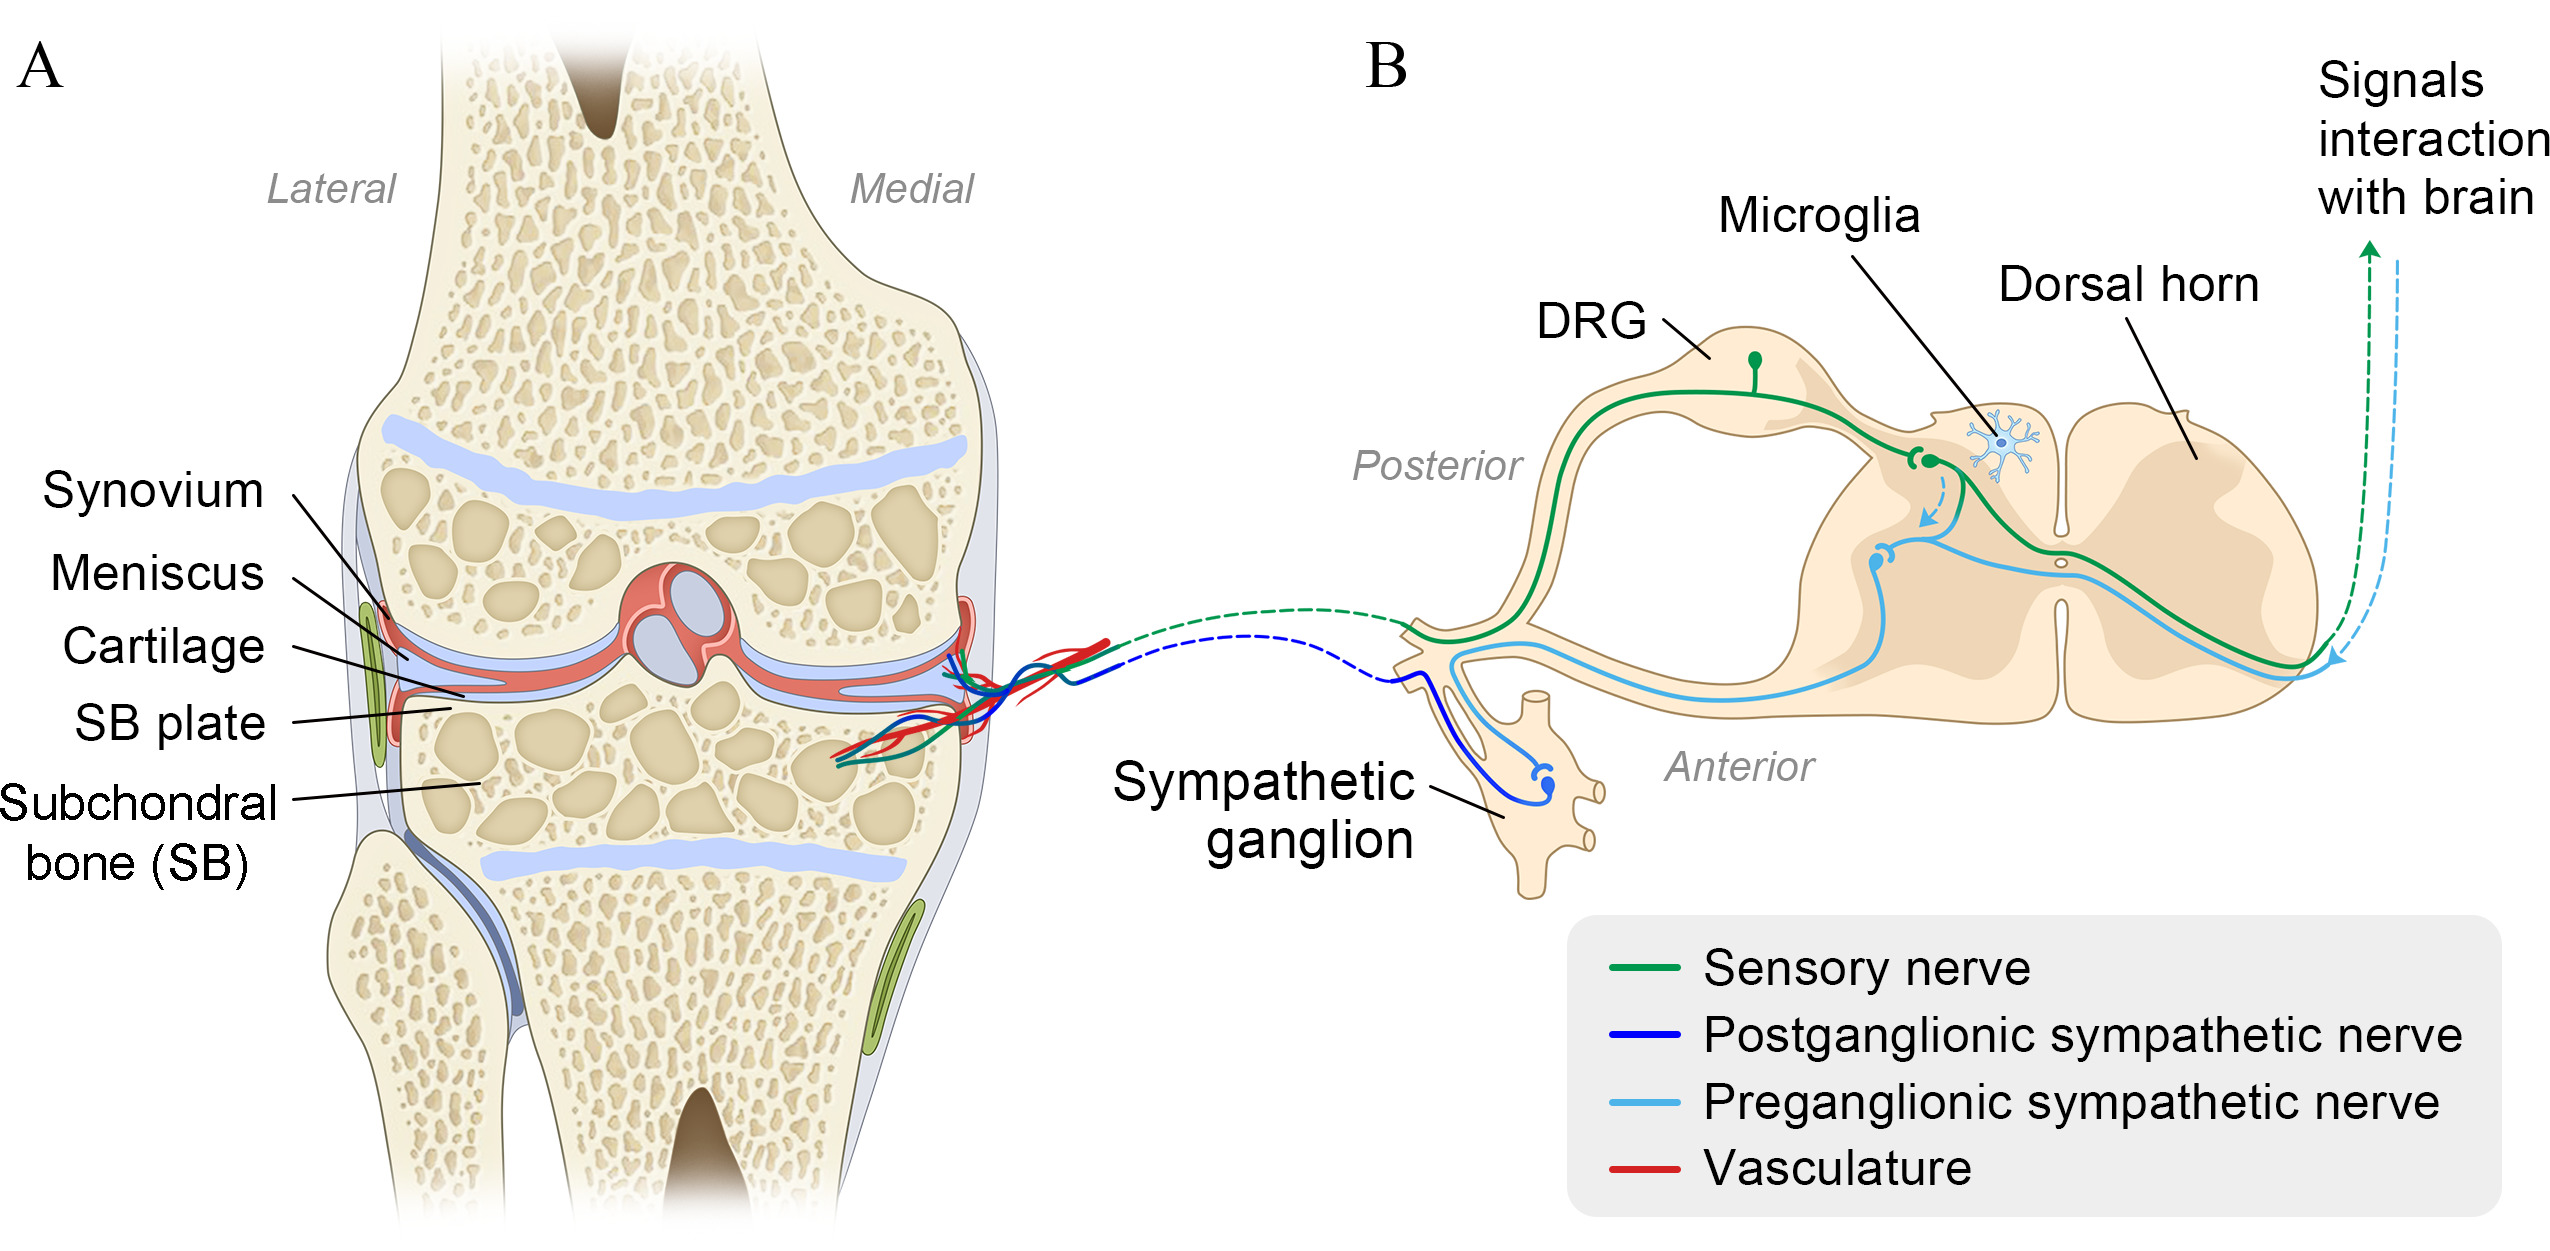 Fig. 1 
            Peripheral innervation and the route of neuron from central nervous system (CNS) to the knee joint. a) The coronal section of the knee joint; b) the cross-section of the knee-related lumbar spinal cord. The knee joint is well innervated by both sensory and sympathetic nerve fibres with fine nerve branches, including subchondral bone, synovium, and meniscus. Sensory and sympathetic nerves mediate the signals between the joint and CNS after relay in the spinal cord. The sensory nerve has a pseudo-unipolar morphology. The axon derived from dorsal root ganglion (DRG) split into the central branch (forms a synaptic junction with second-order sensory neurones in the dorsal horn to relay the information to CNS) and peripheral branch (extends the target cells or tissues of the joint). After relay in the lateral horn of spinal cord, preganglionic neurone communicates with postganglionic neurone through chemical synapses within the sympathetic ganglion; postganglionic neurone innervated into peripheral target tissues in the joint, commonly accompanied by vasculature (red). Additionally, the sensory nerve can interact with sympathetic nerve at the level of spinal cord.
          